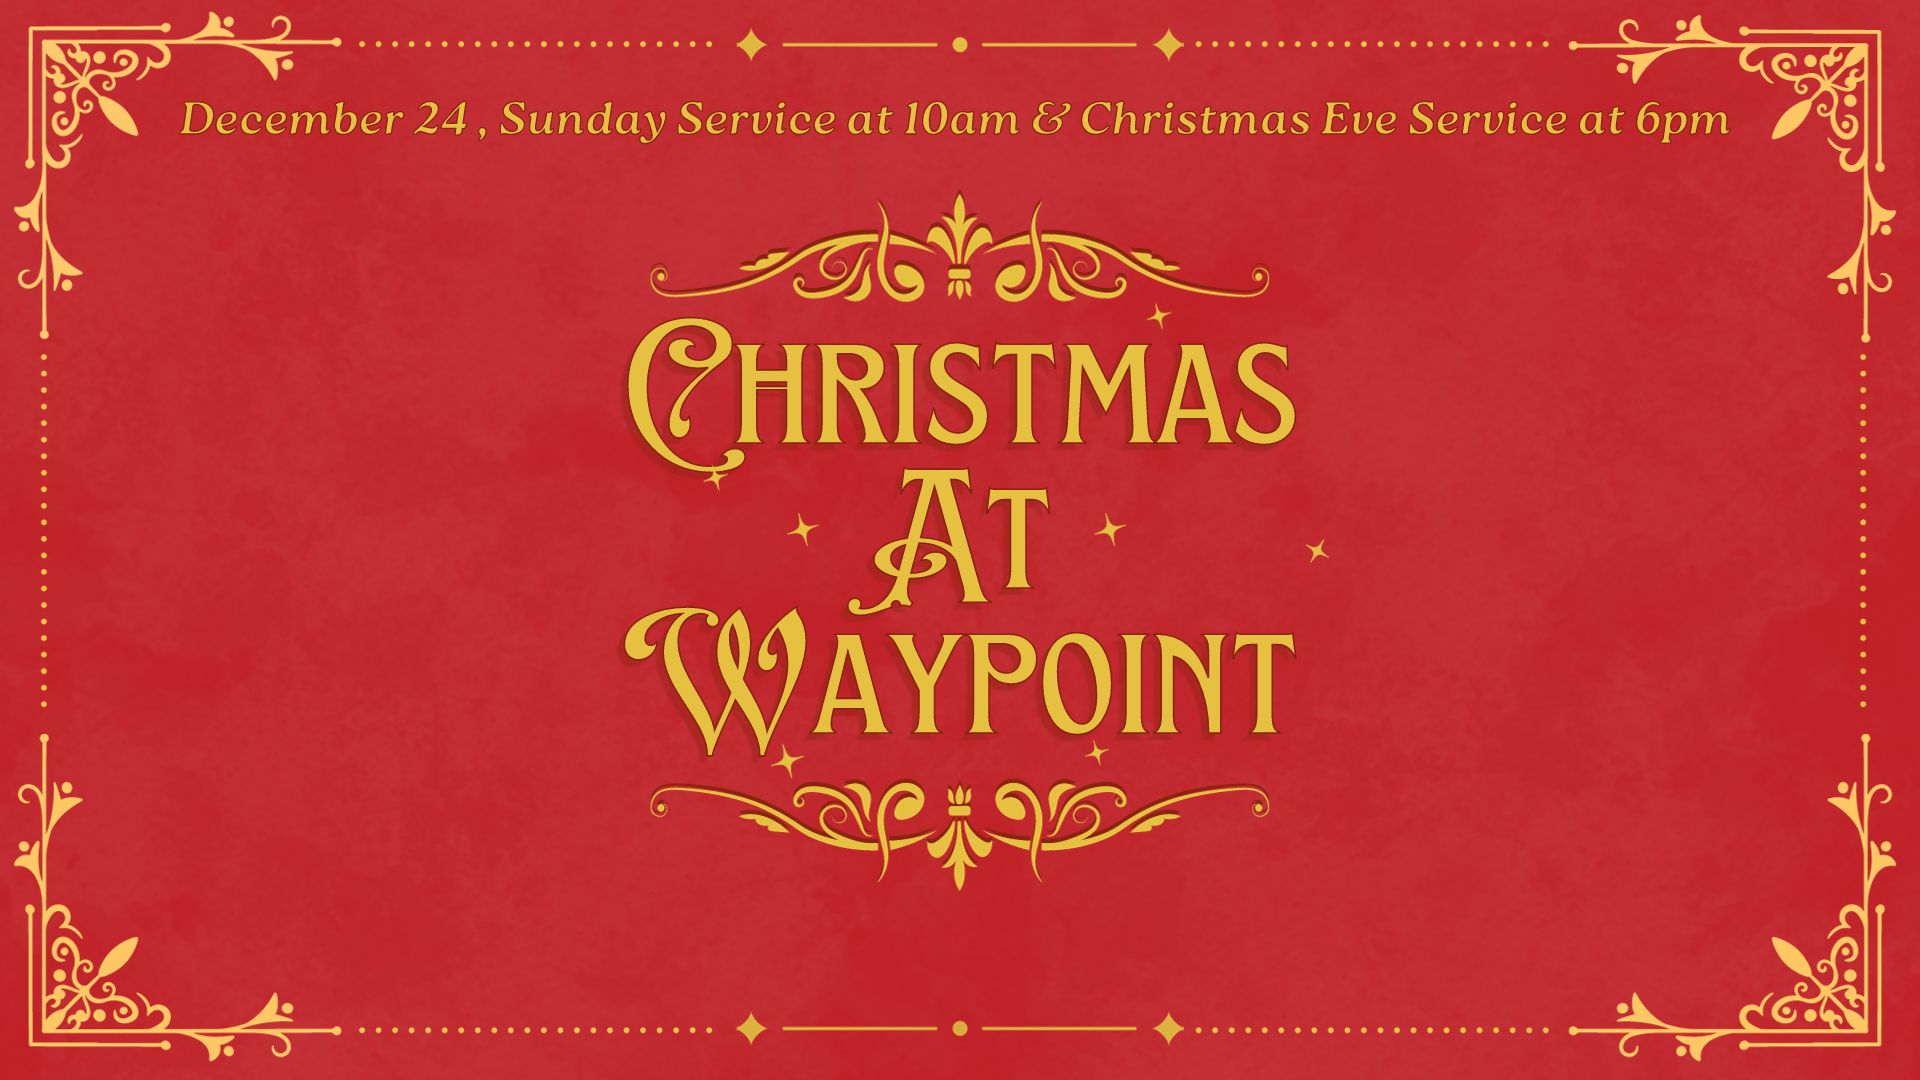 Christmas Eve Service at Waypoint Church